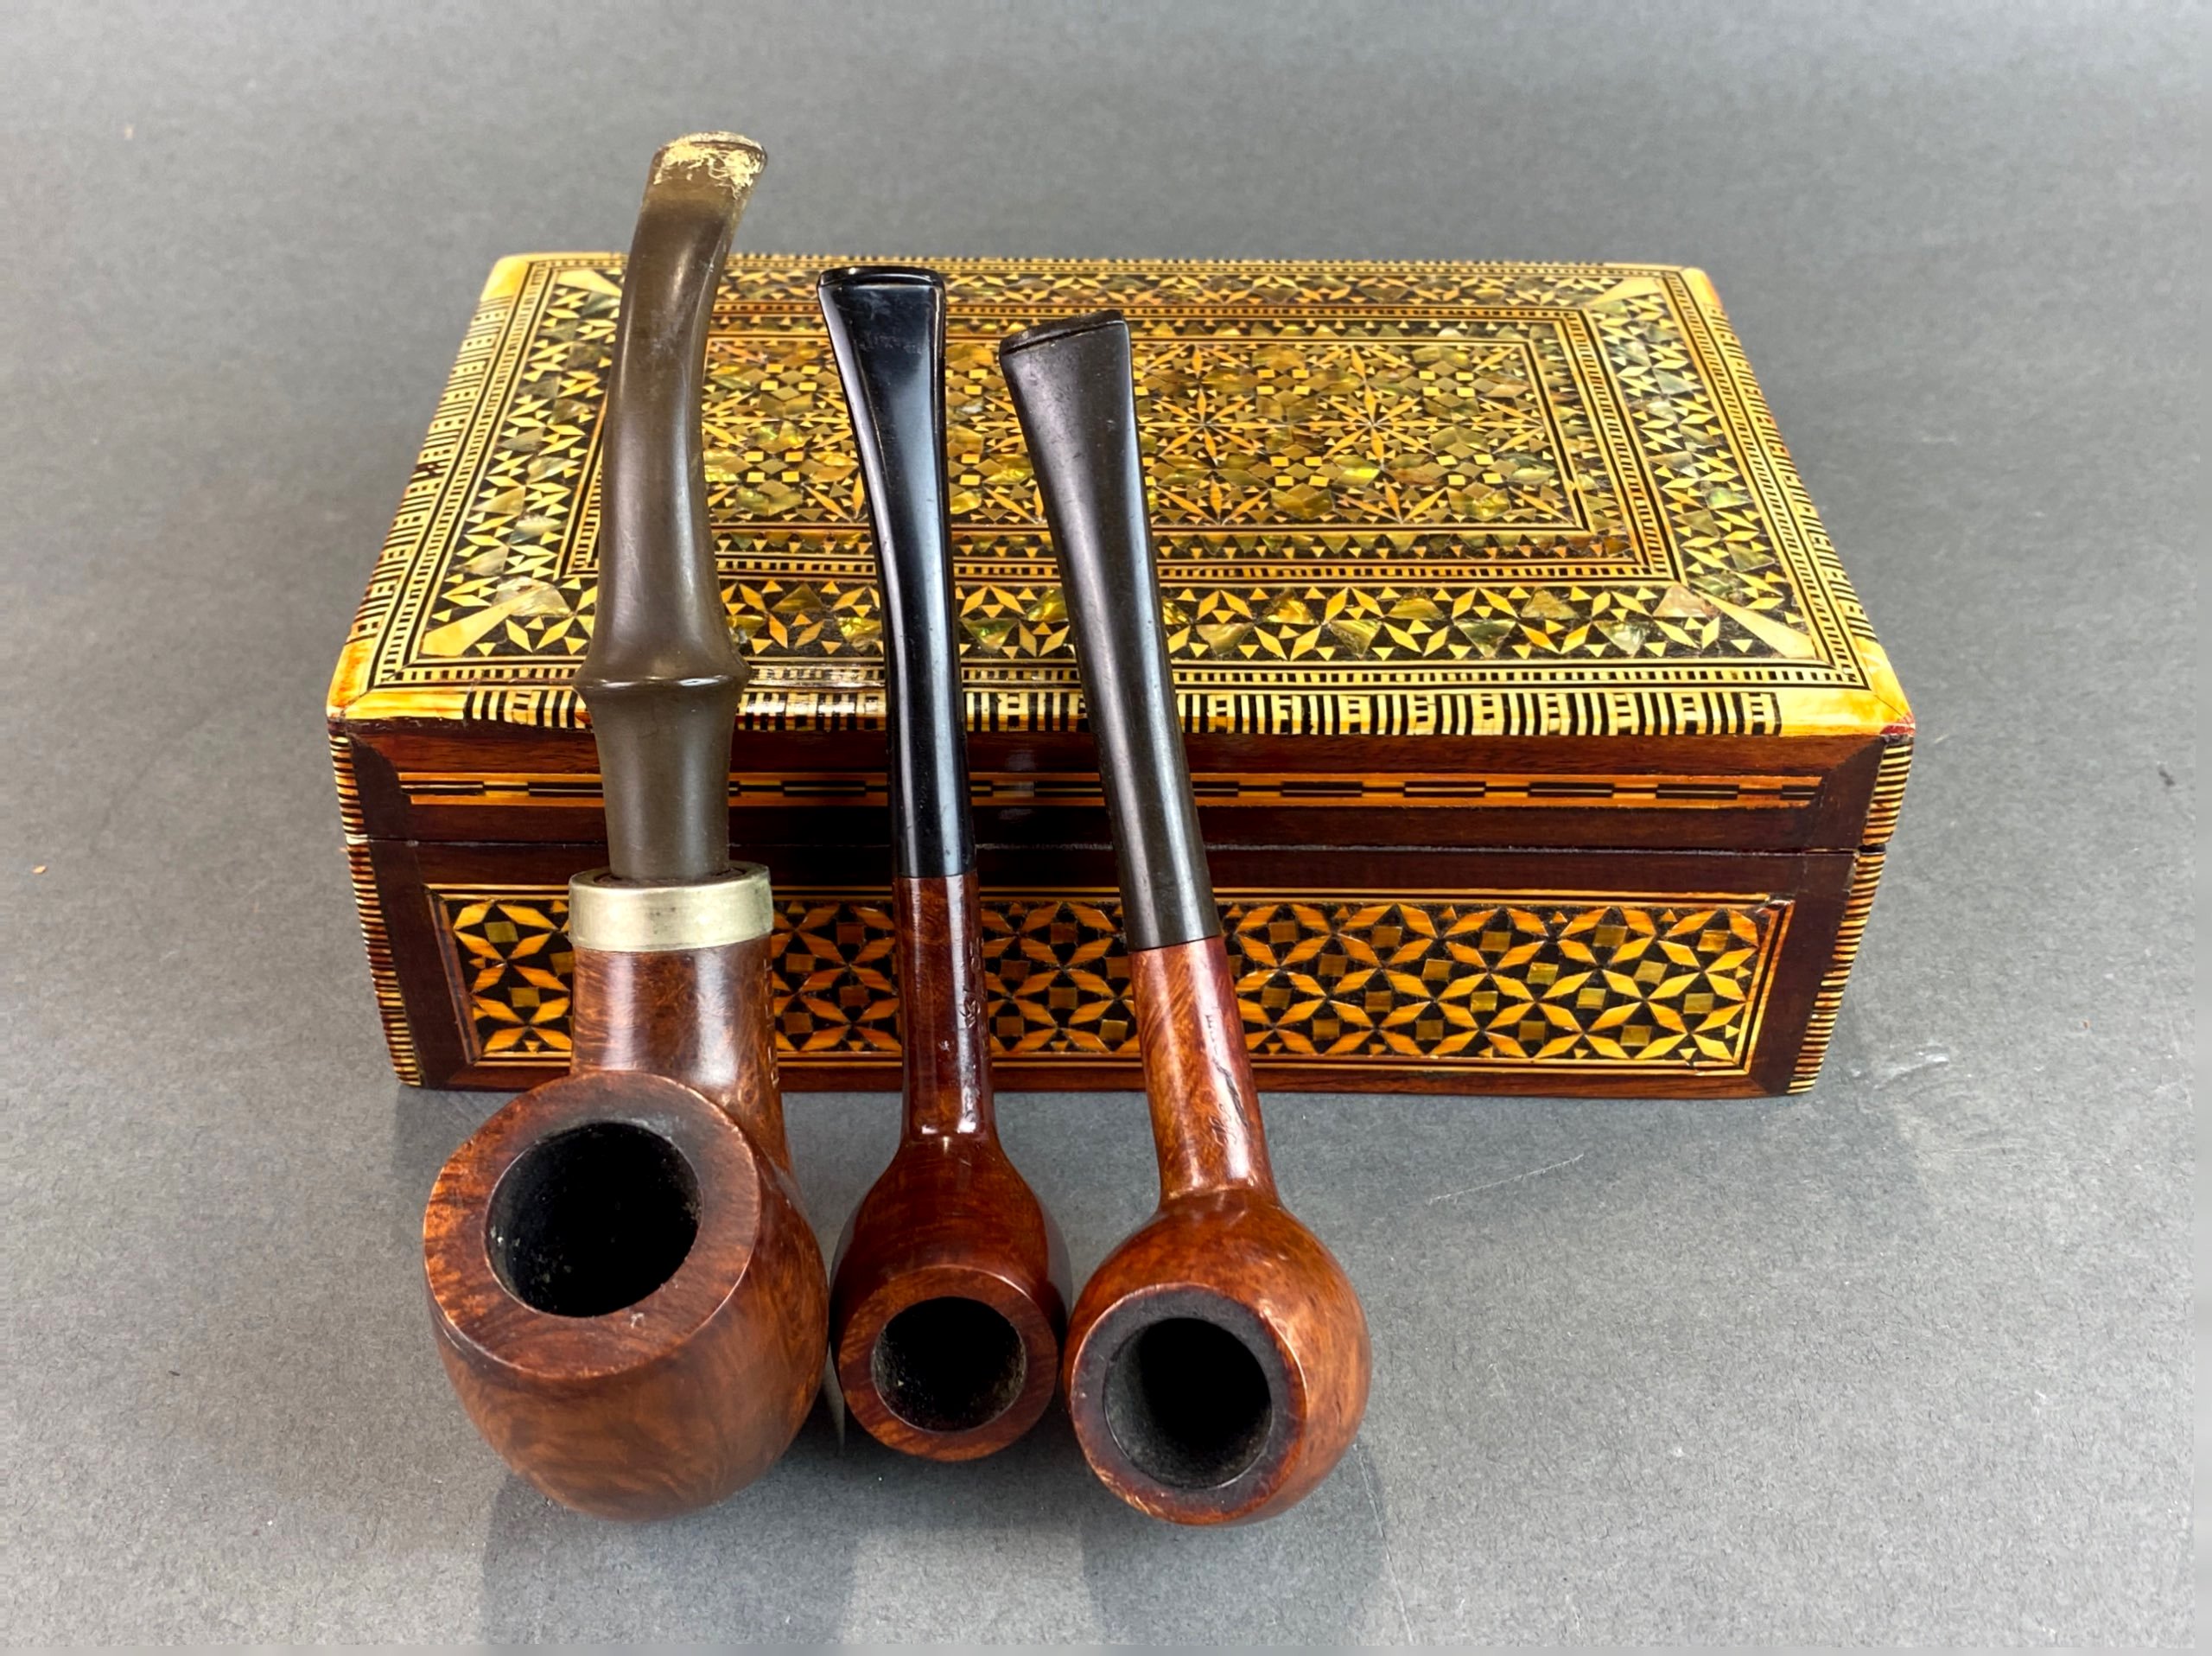 An inlaid box and three vintage tobacco pipes. - Image 2 of 2